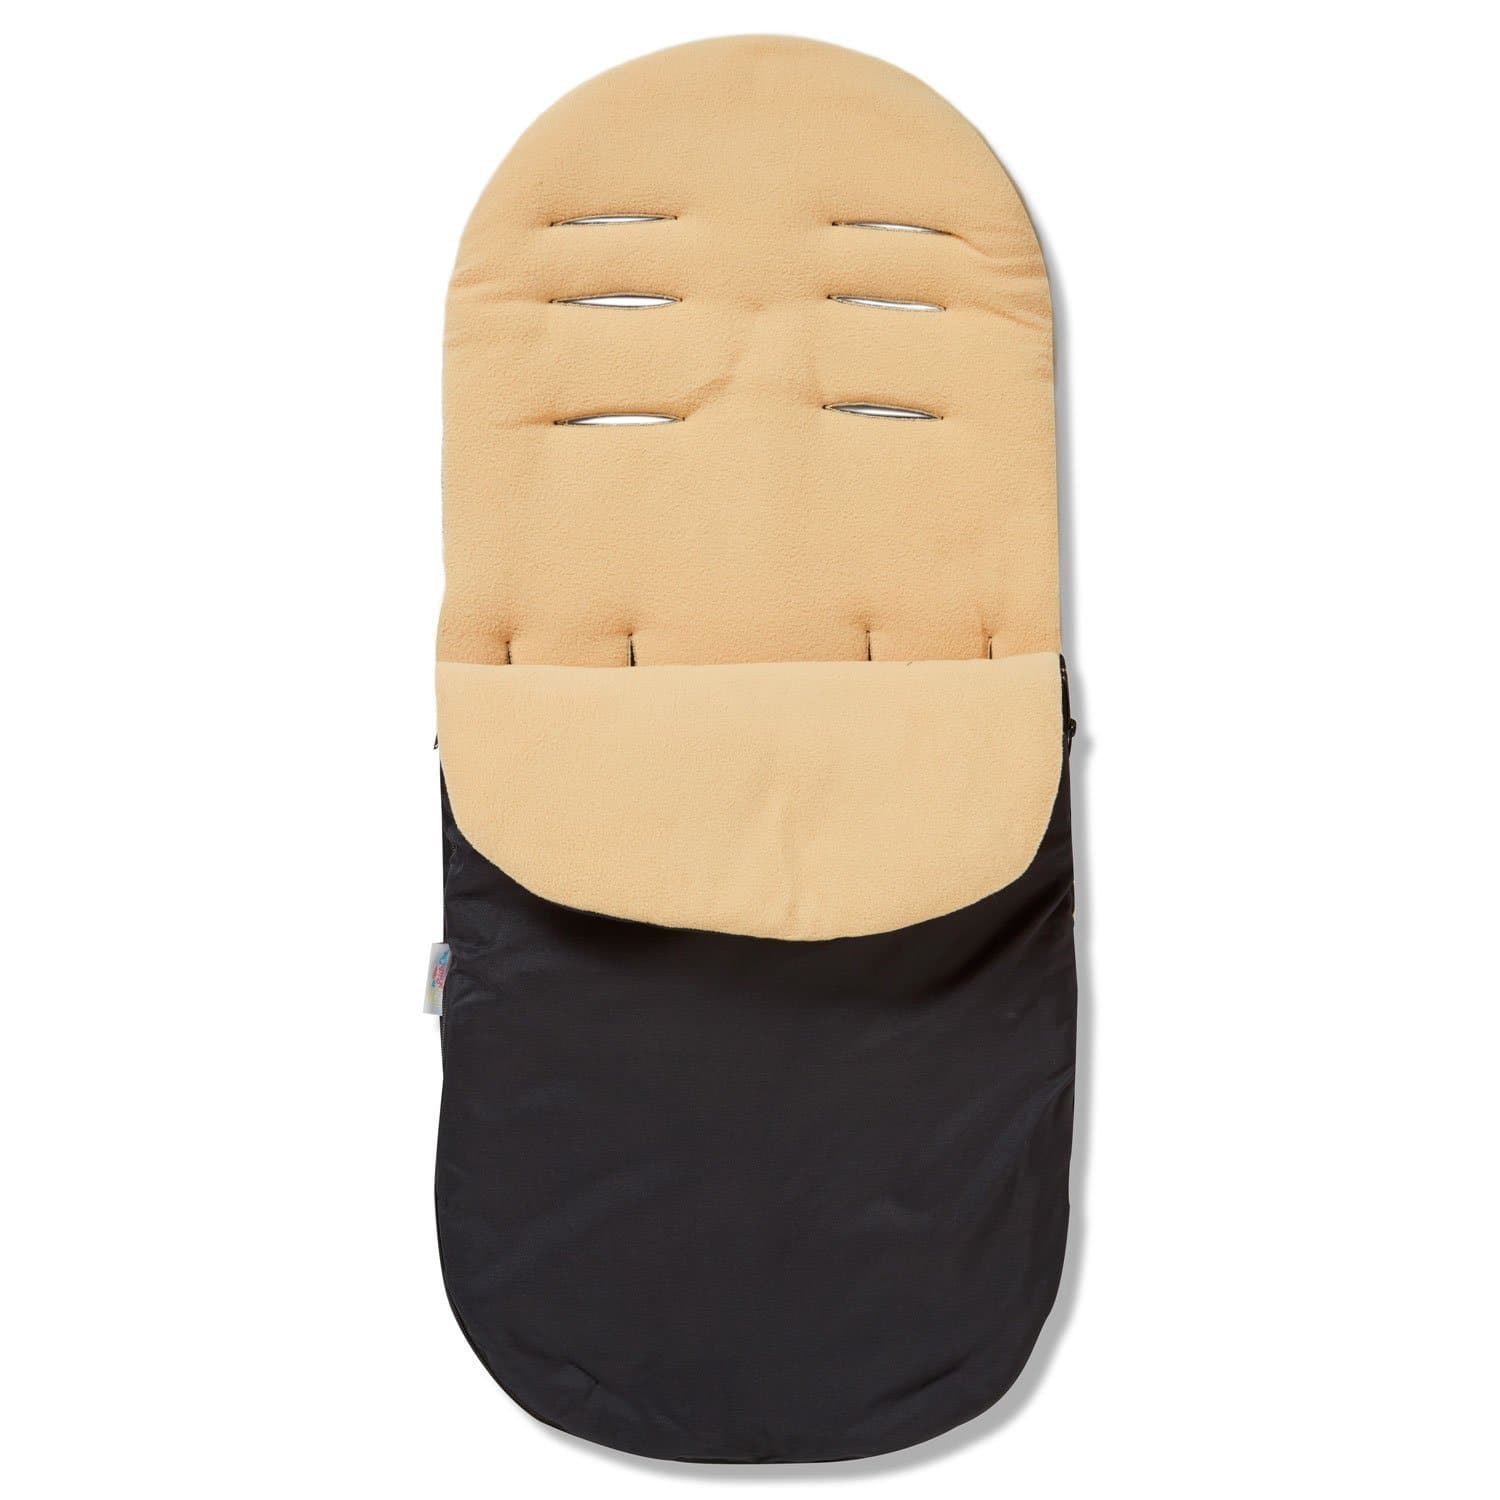 Footmuff / Cosy Toes Compatible with XTS - Sand / Fits All Models | For Your Little One